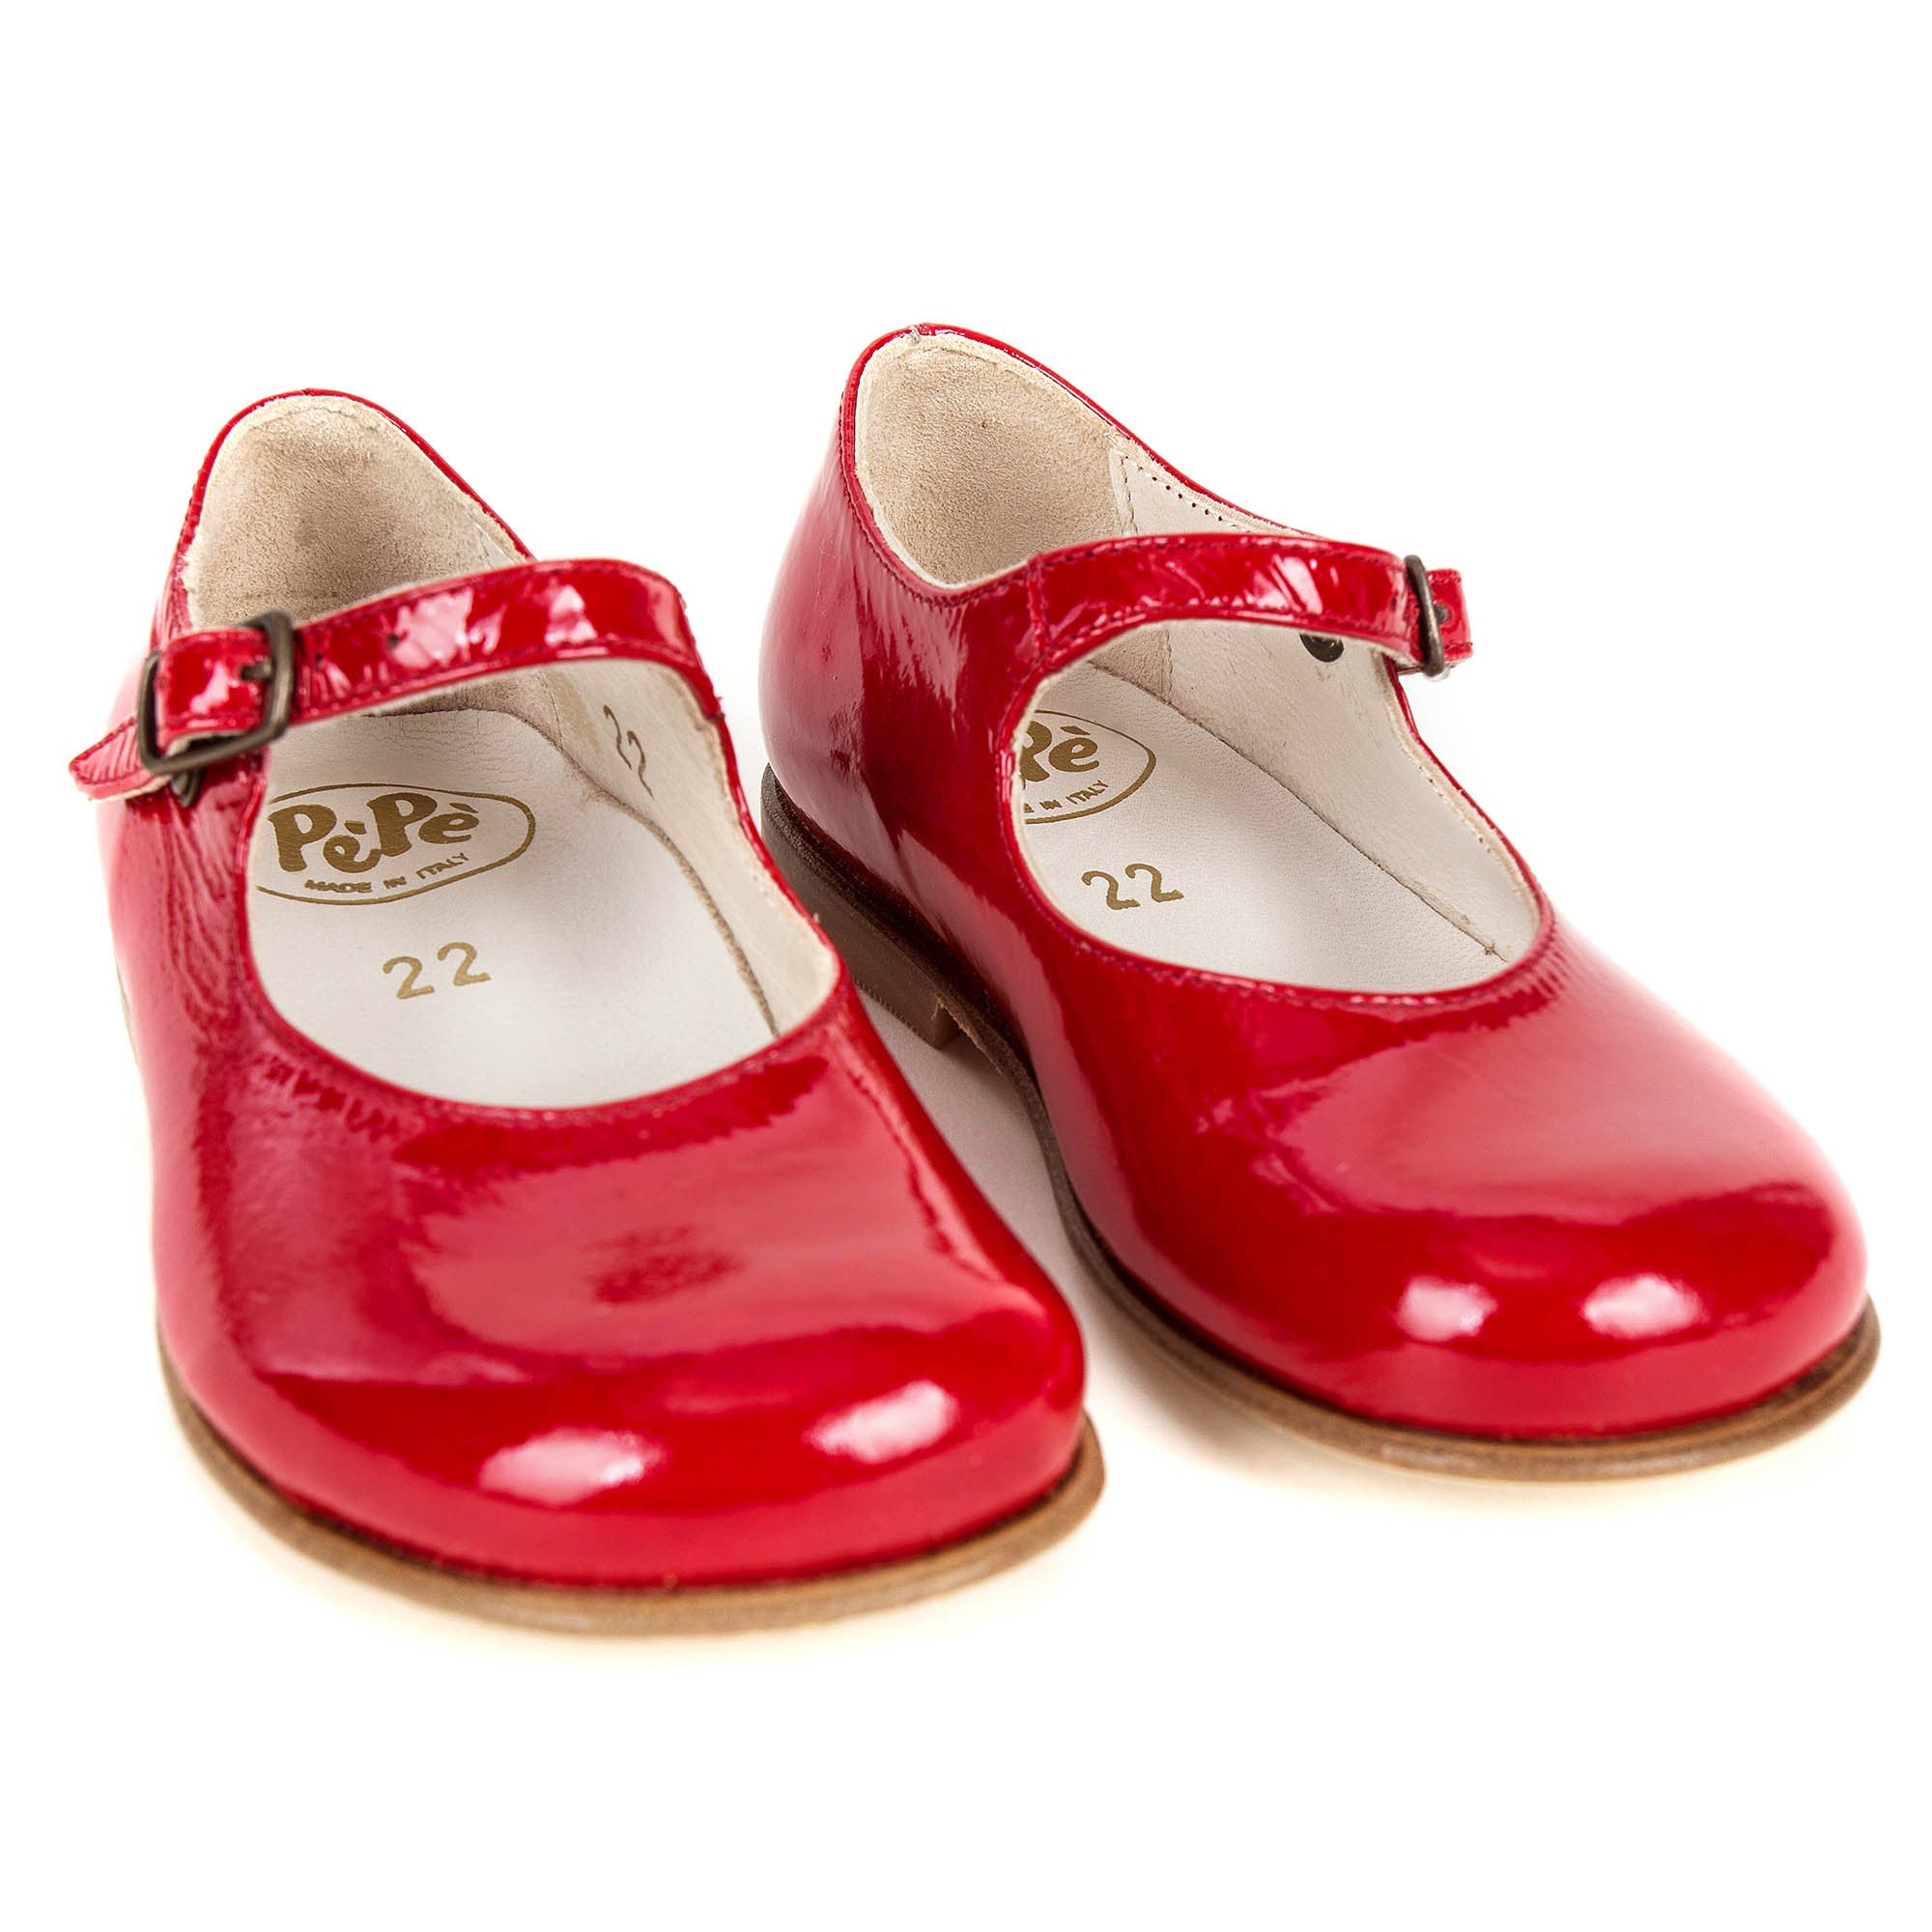 Girls Red Lambskin Leather Shoes